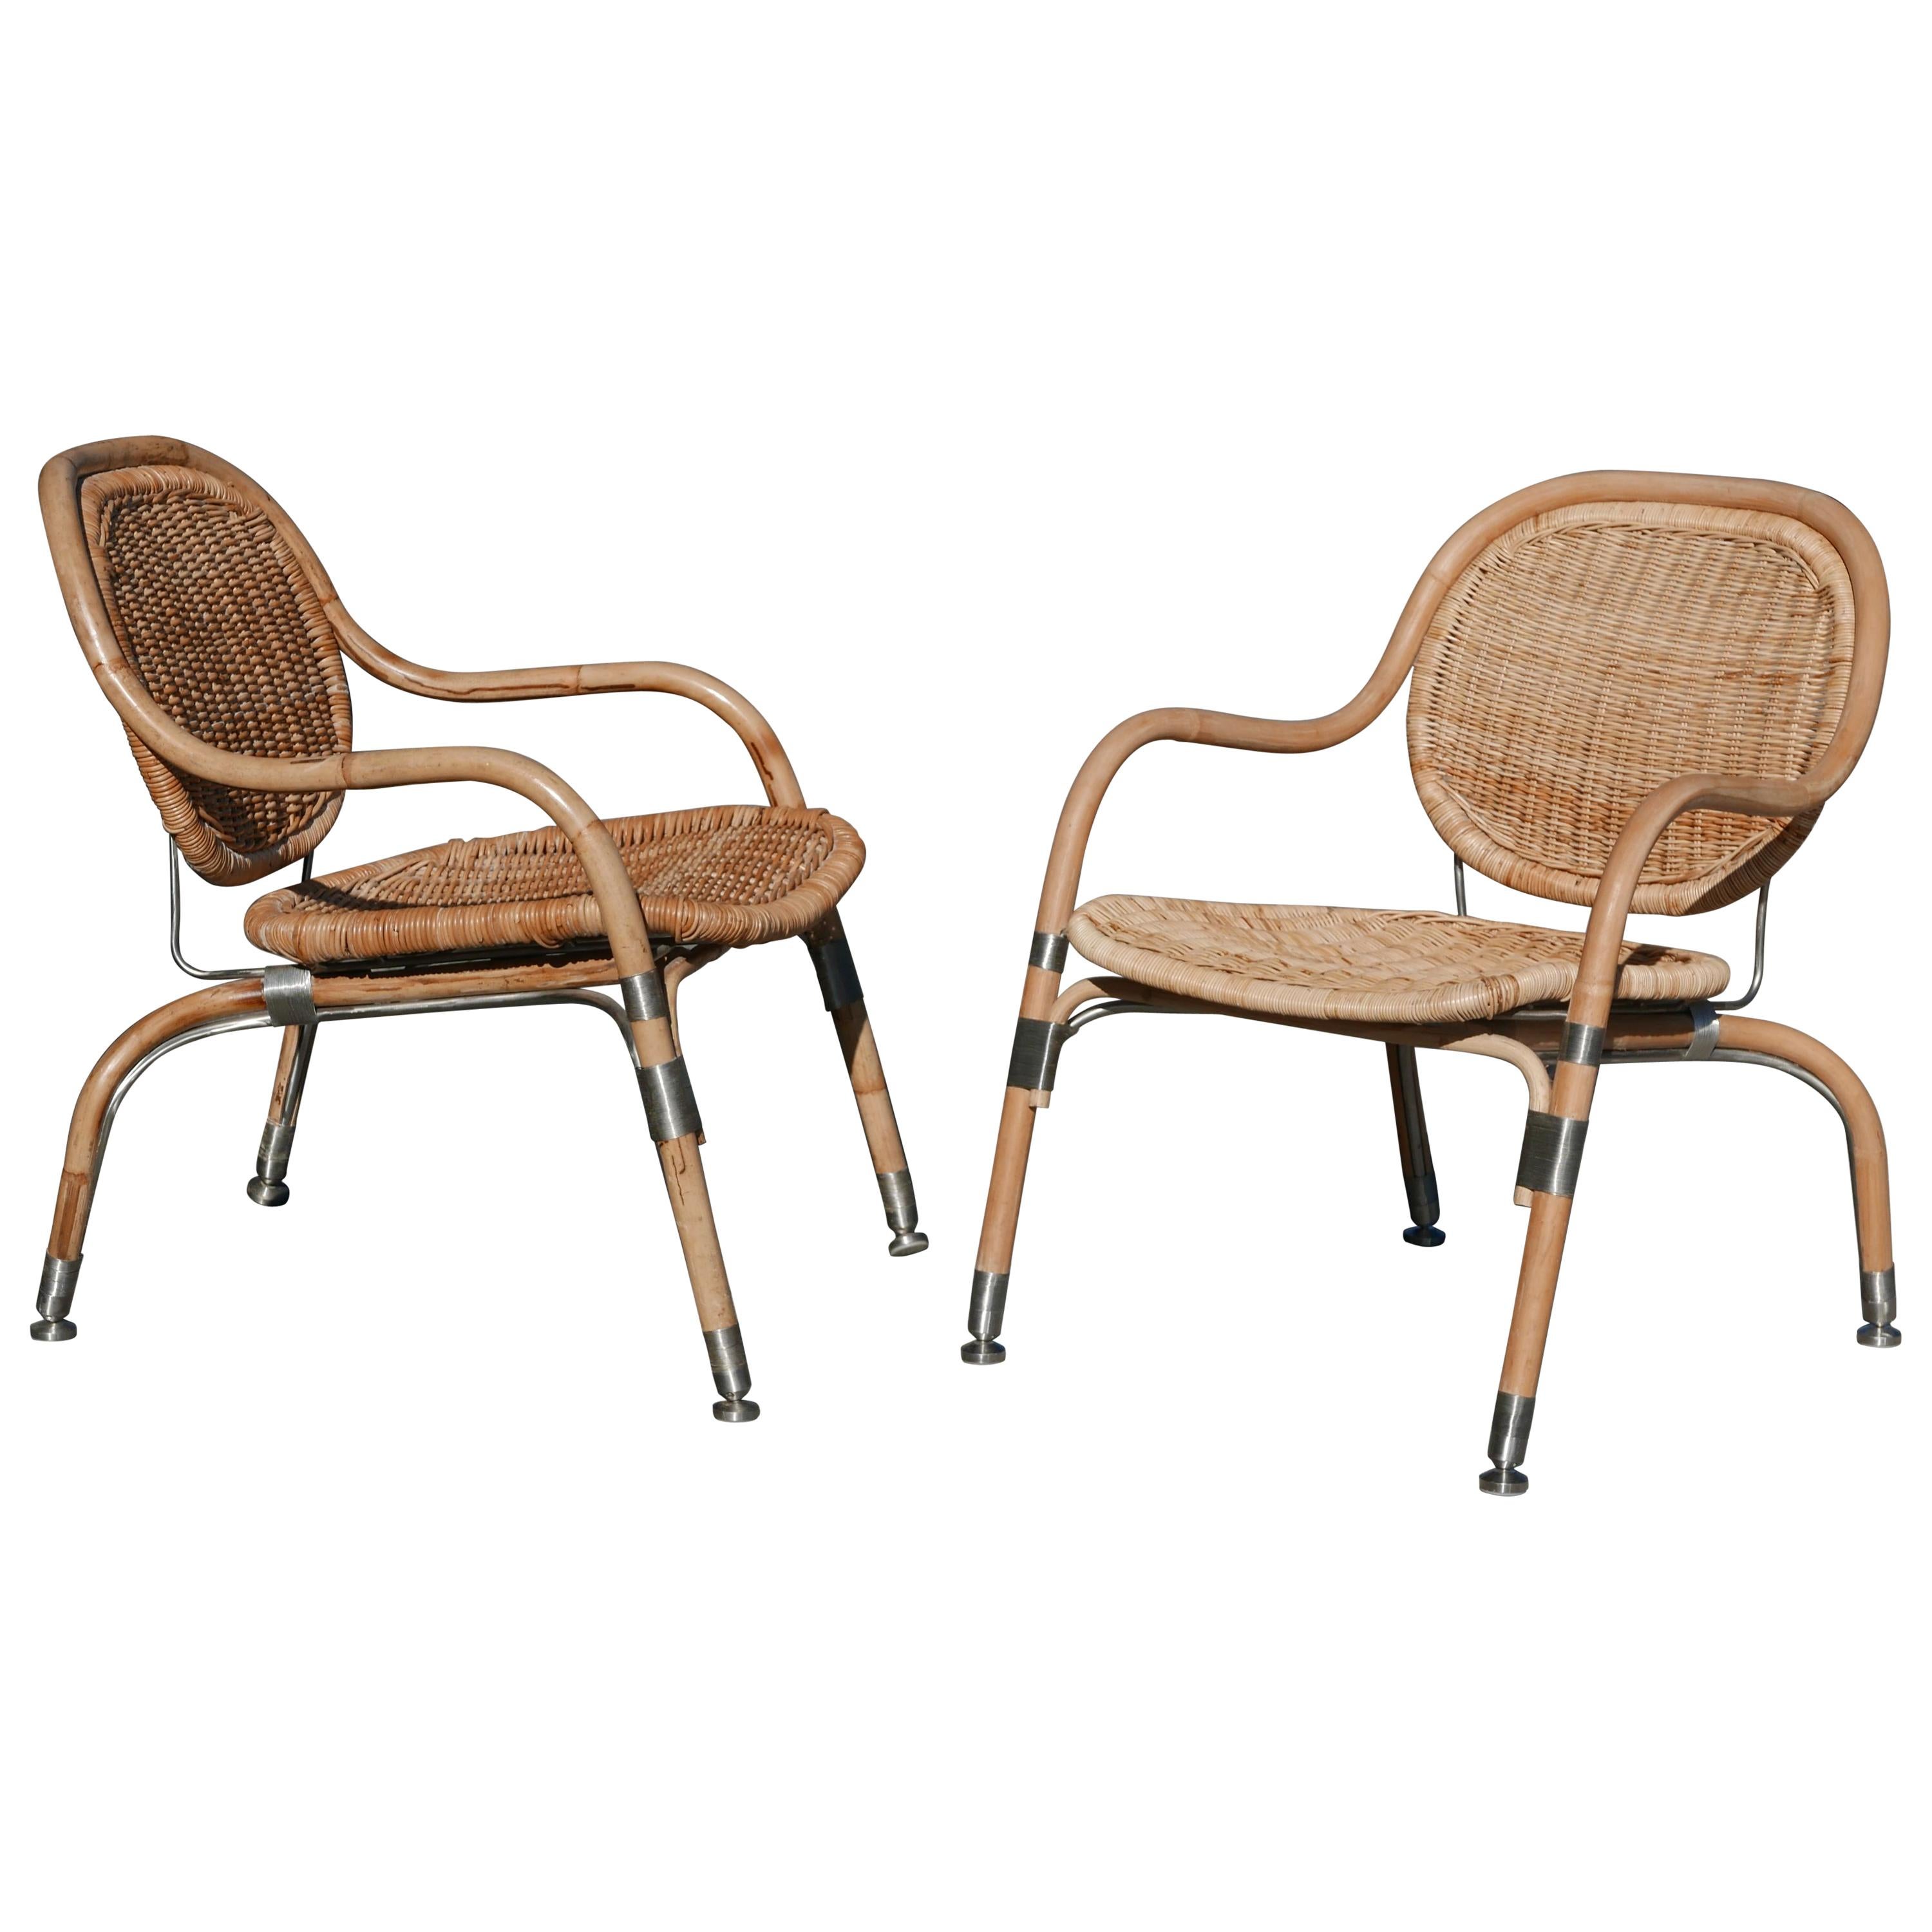 Pair of Mats Theselius Rattan and Steel Chairs for Ikea